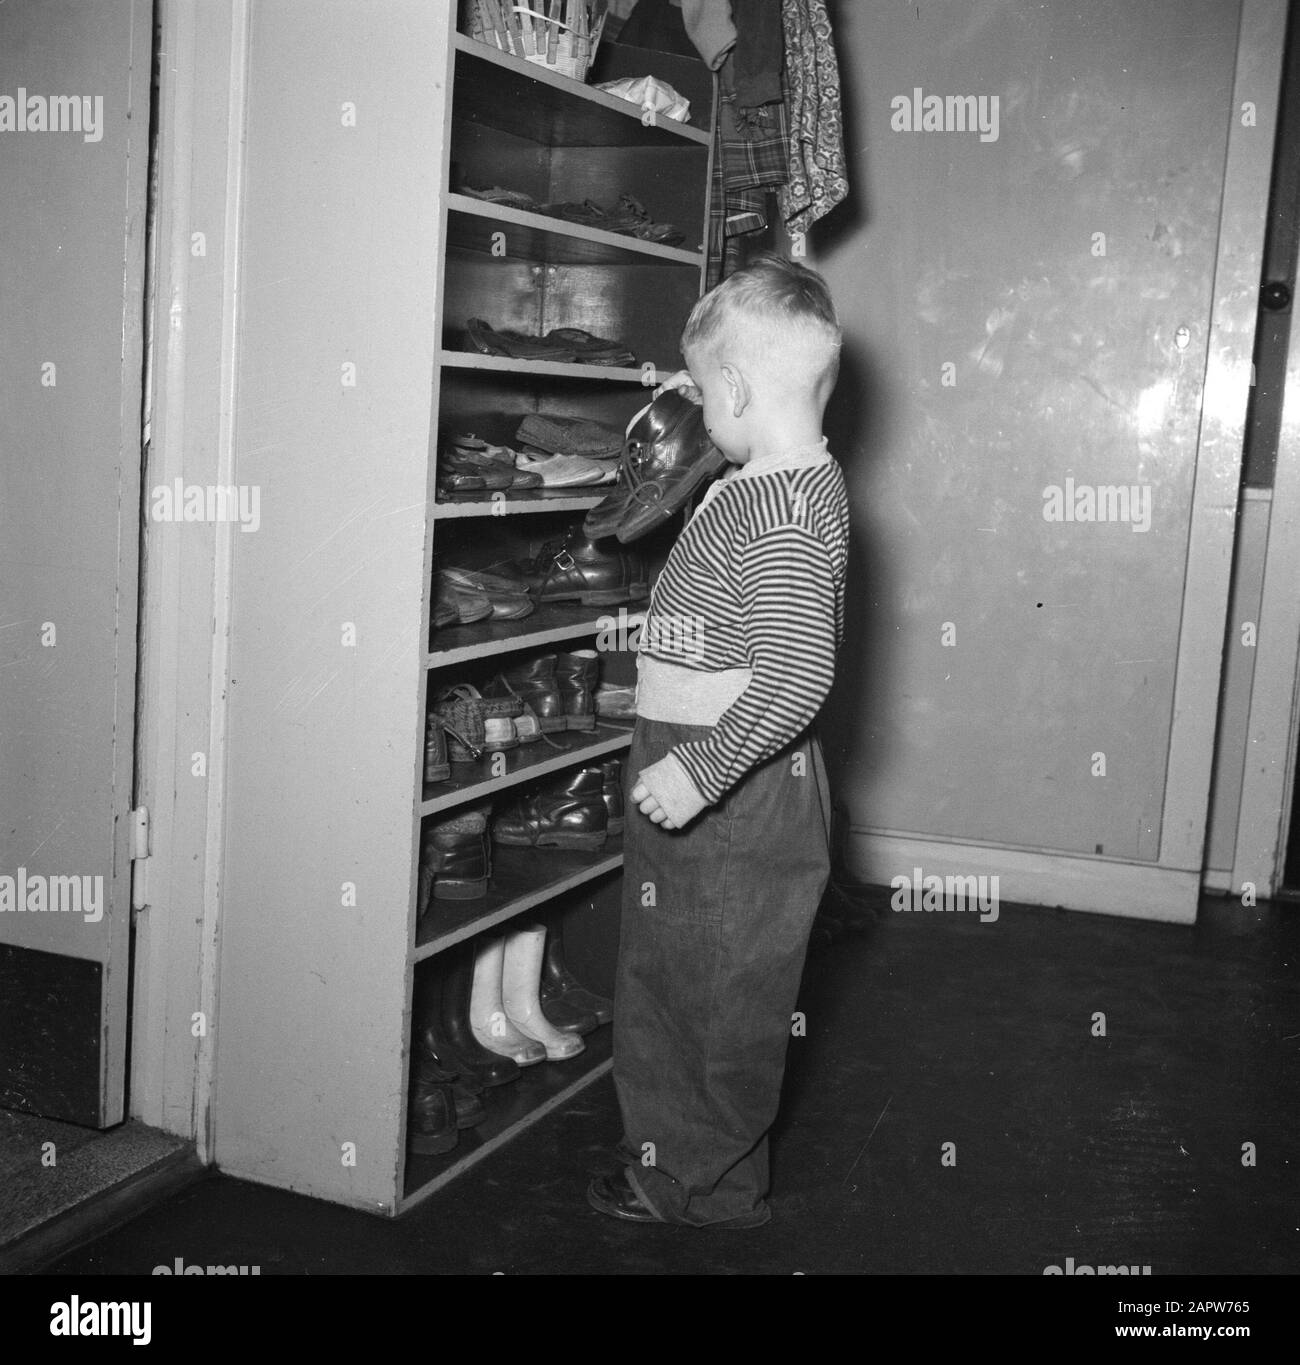 Look at the nursery of the Tuborg Brewery Preschooler with a pair of shoes  in hand near a closet full of shoes Date: March 1954 Location: Denmark,  Hellerup Keywords: childcare, etc. preschool